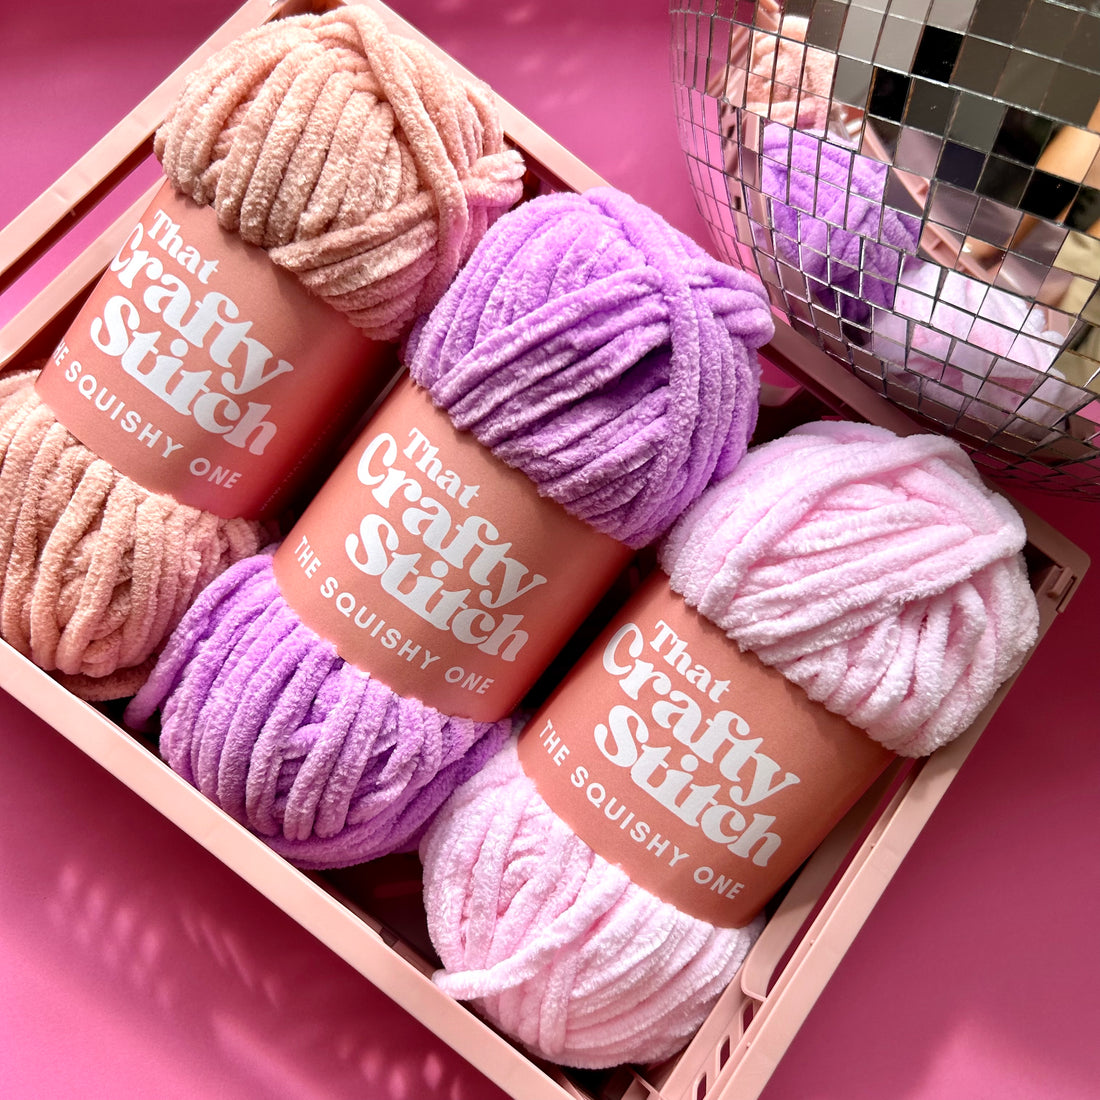 Let's talk about yarn baby!